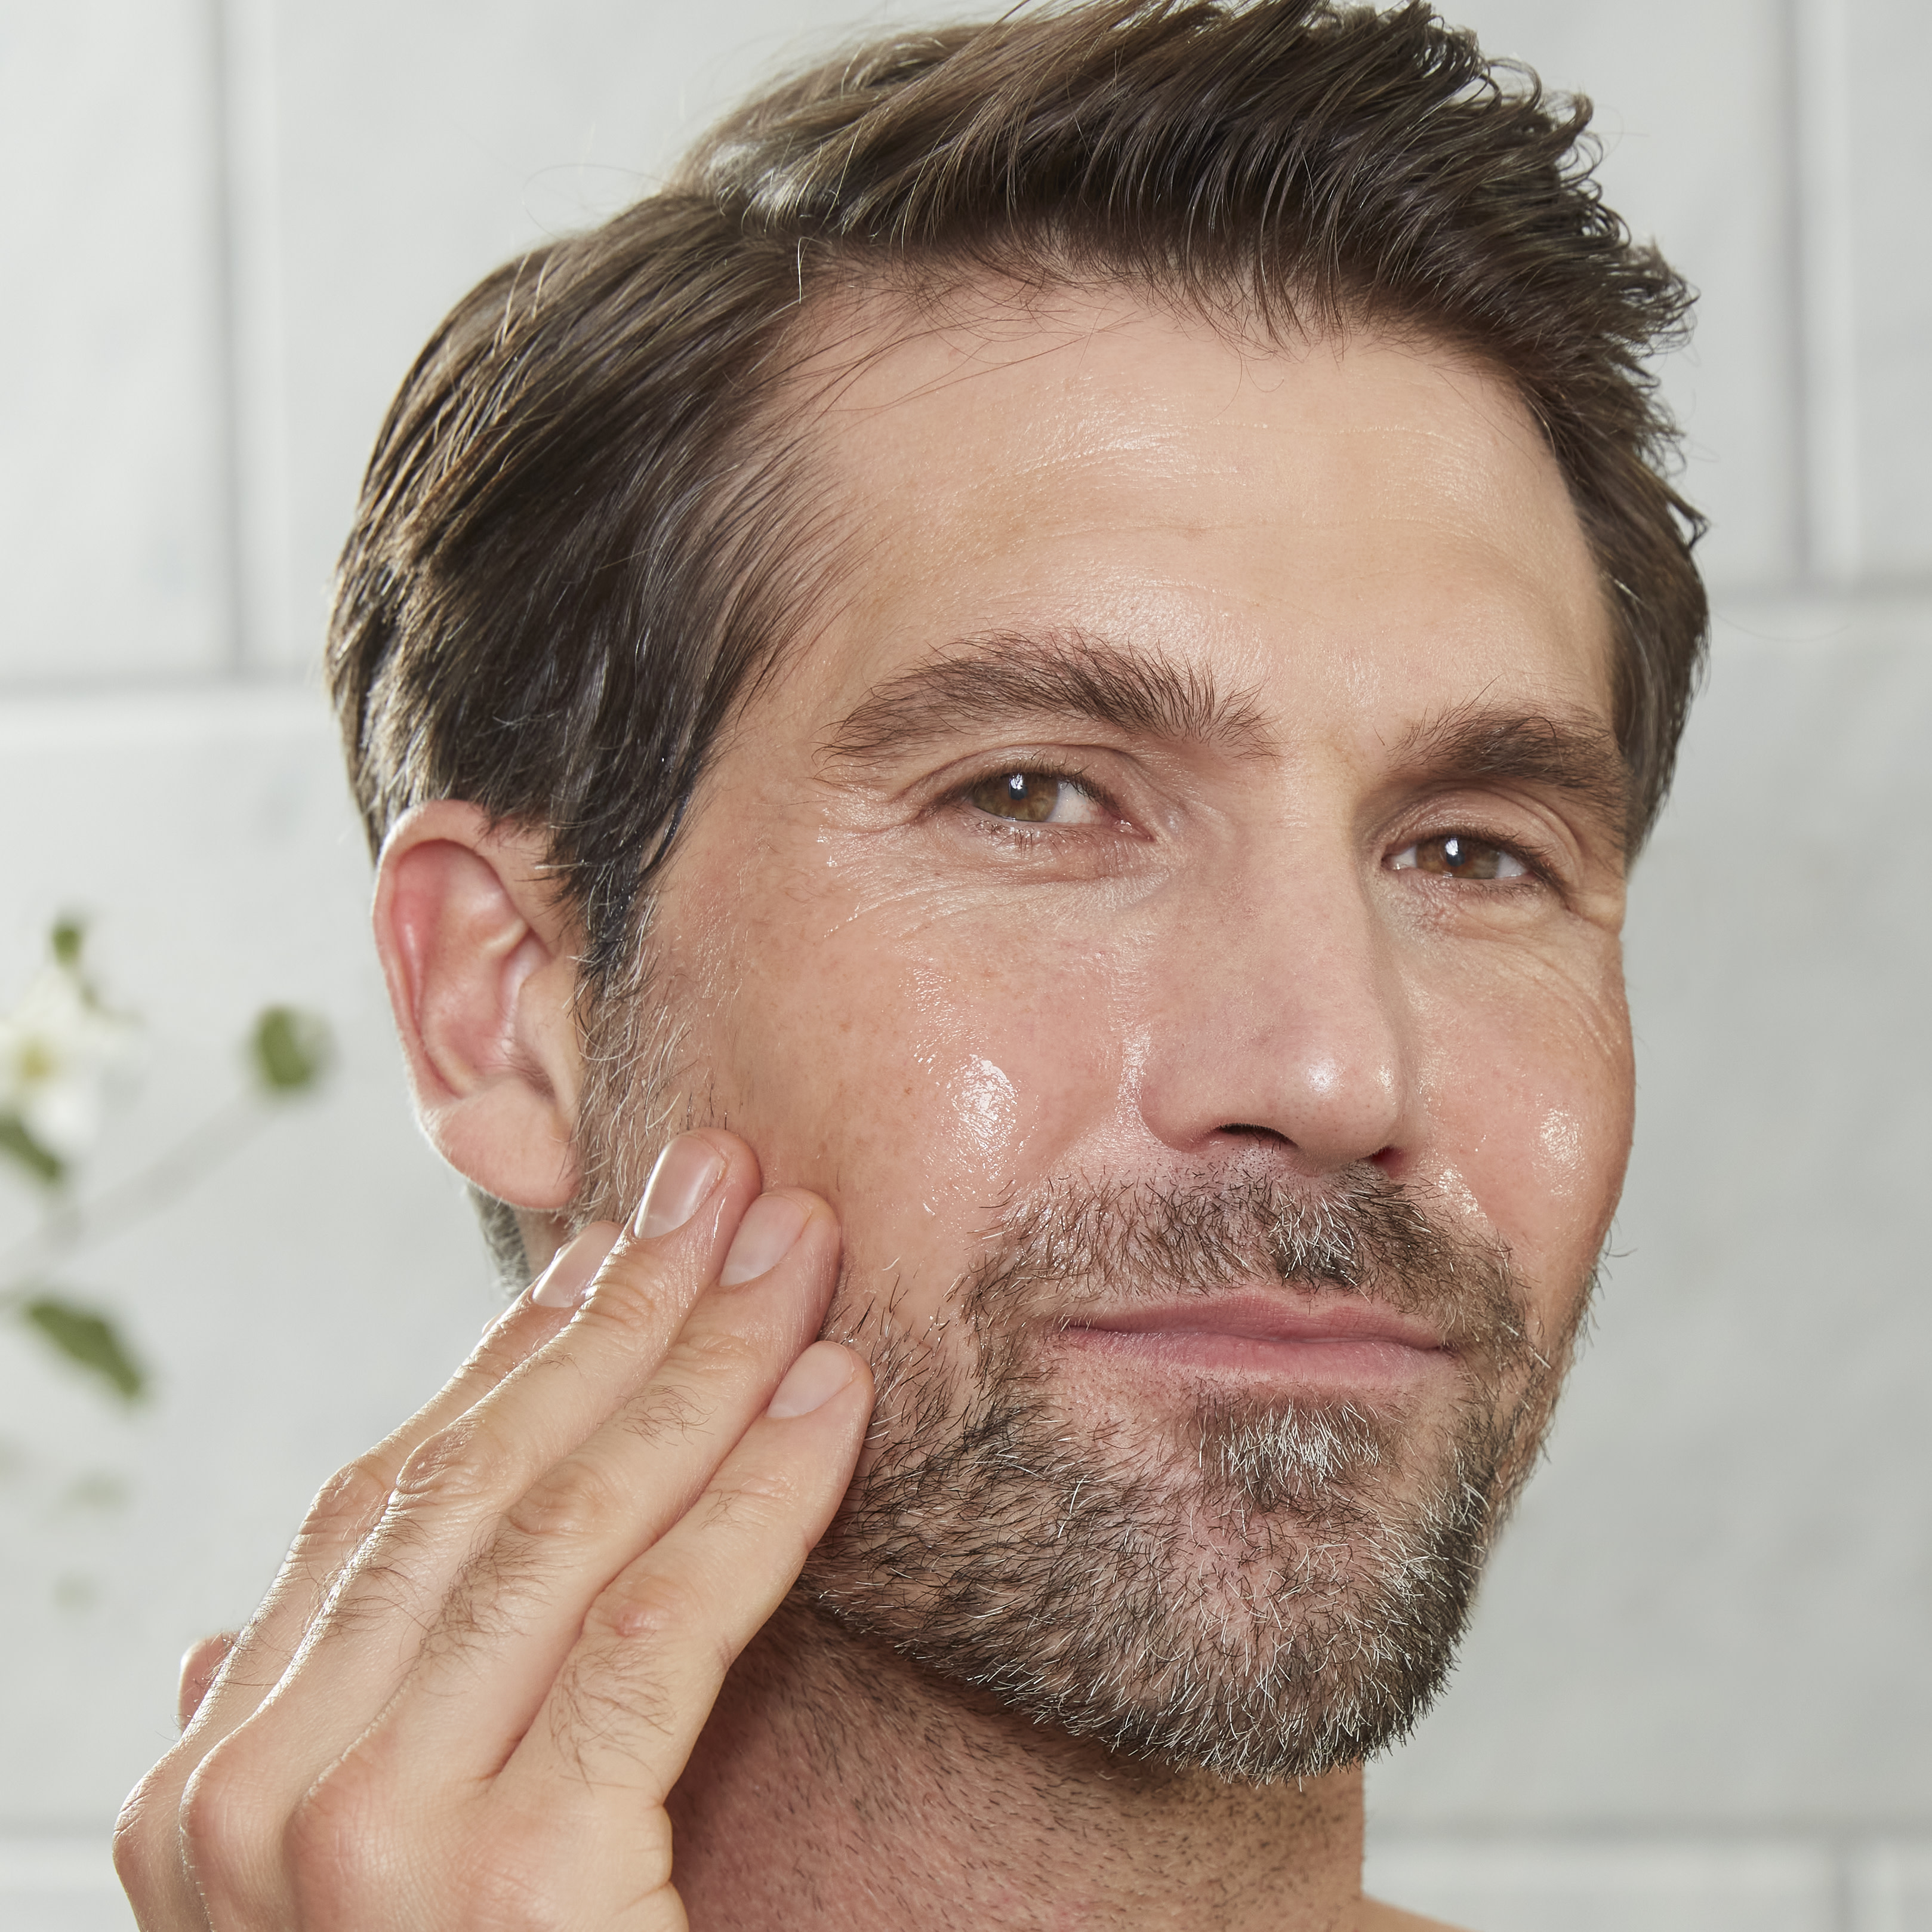 A light-tone male model with mature yet glowy, smooth, and radiant skin washing off an exfoliating mask while holding the white-coloured tube in his hand.